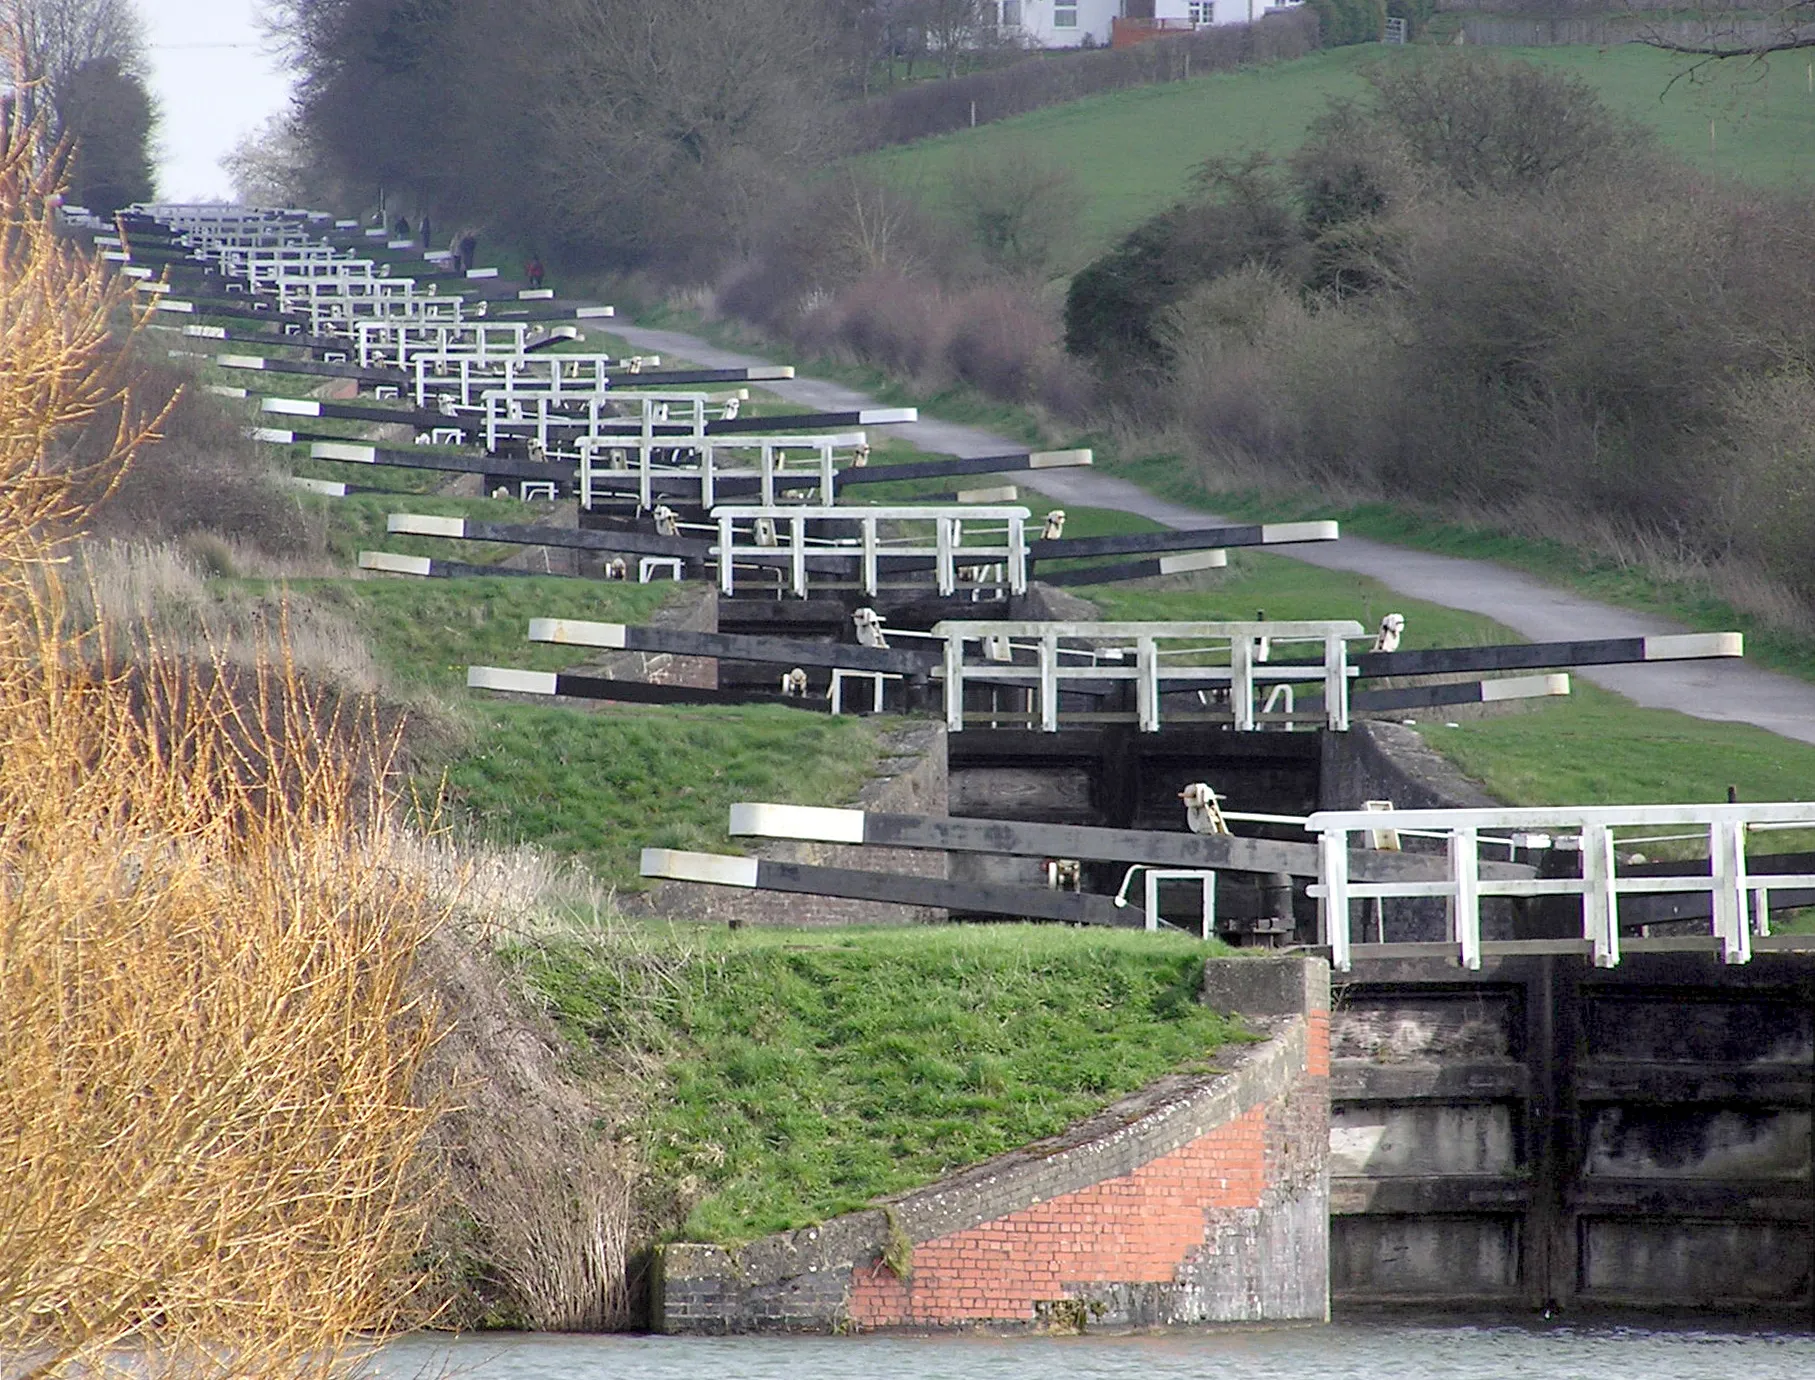 Photo showing: The Caen Hill locks, on the Kennet and Avon Canal, Devizes, Wiltshire, England, in early Spring. The sixteen locks of Caen Hill (seen in this picture), and a further 13 locks, stretch over only 2 miles of the canal. The large side ponds are not seen here. The white "fences" are bridges across each lock.
The building of these locks in 1810 marked completion of the whole 57 mile distance from Newbury to Bath. 
Photographed by Adrian Pingstone in March 2007 and placed in the public domain.
Other versions: